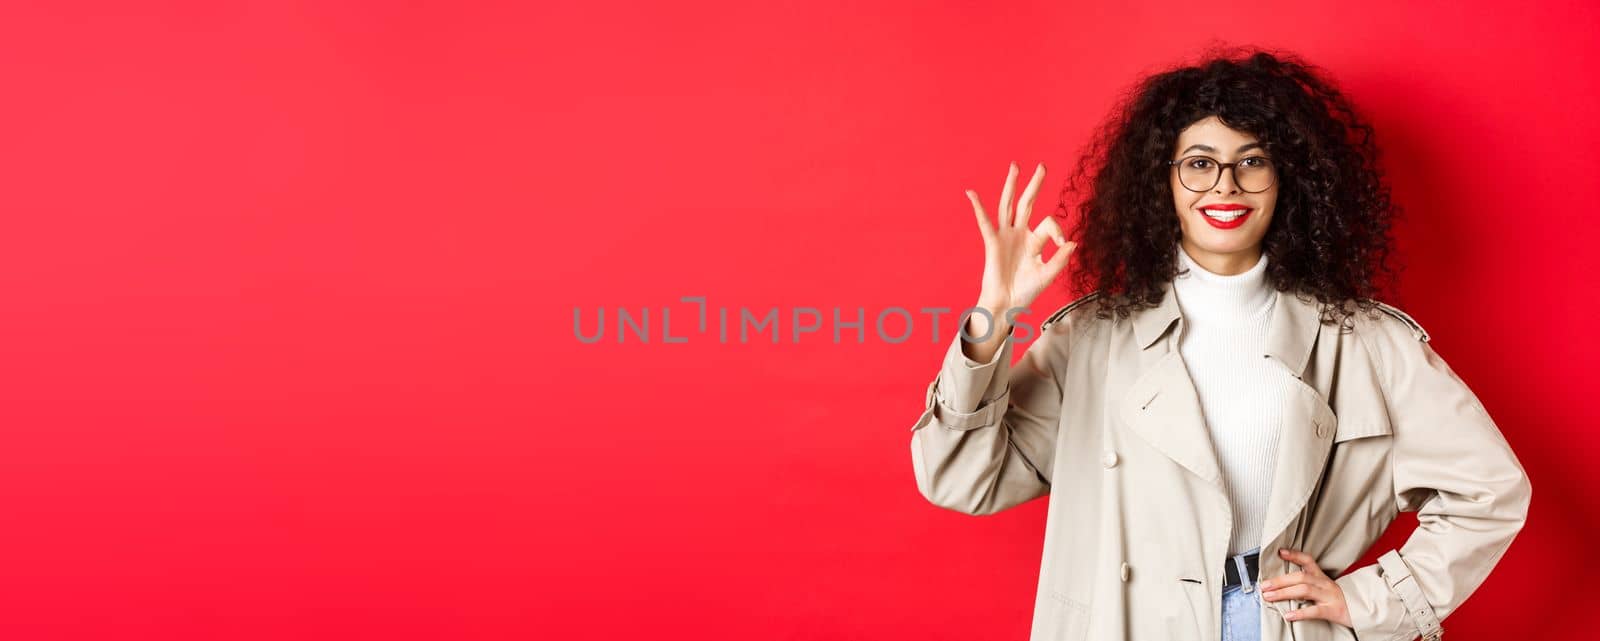 Portrait of confident trendy woman in glasses and trench coat, showing okay gesture to approve or agree with you, say yes, standing on red background.